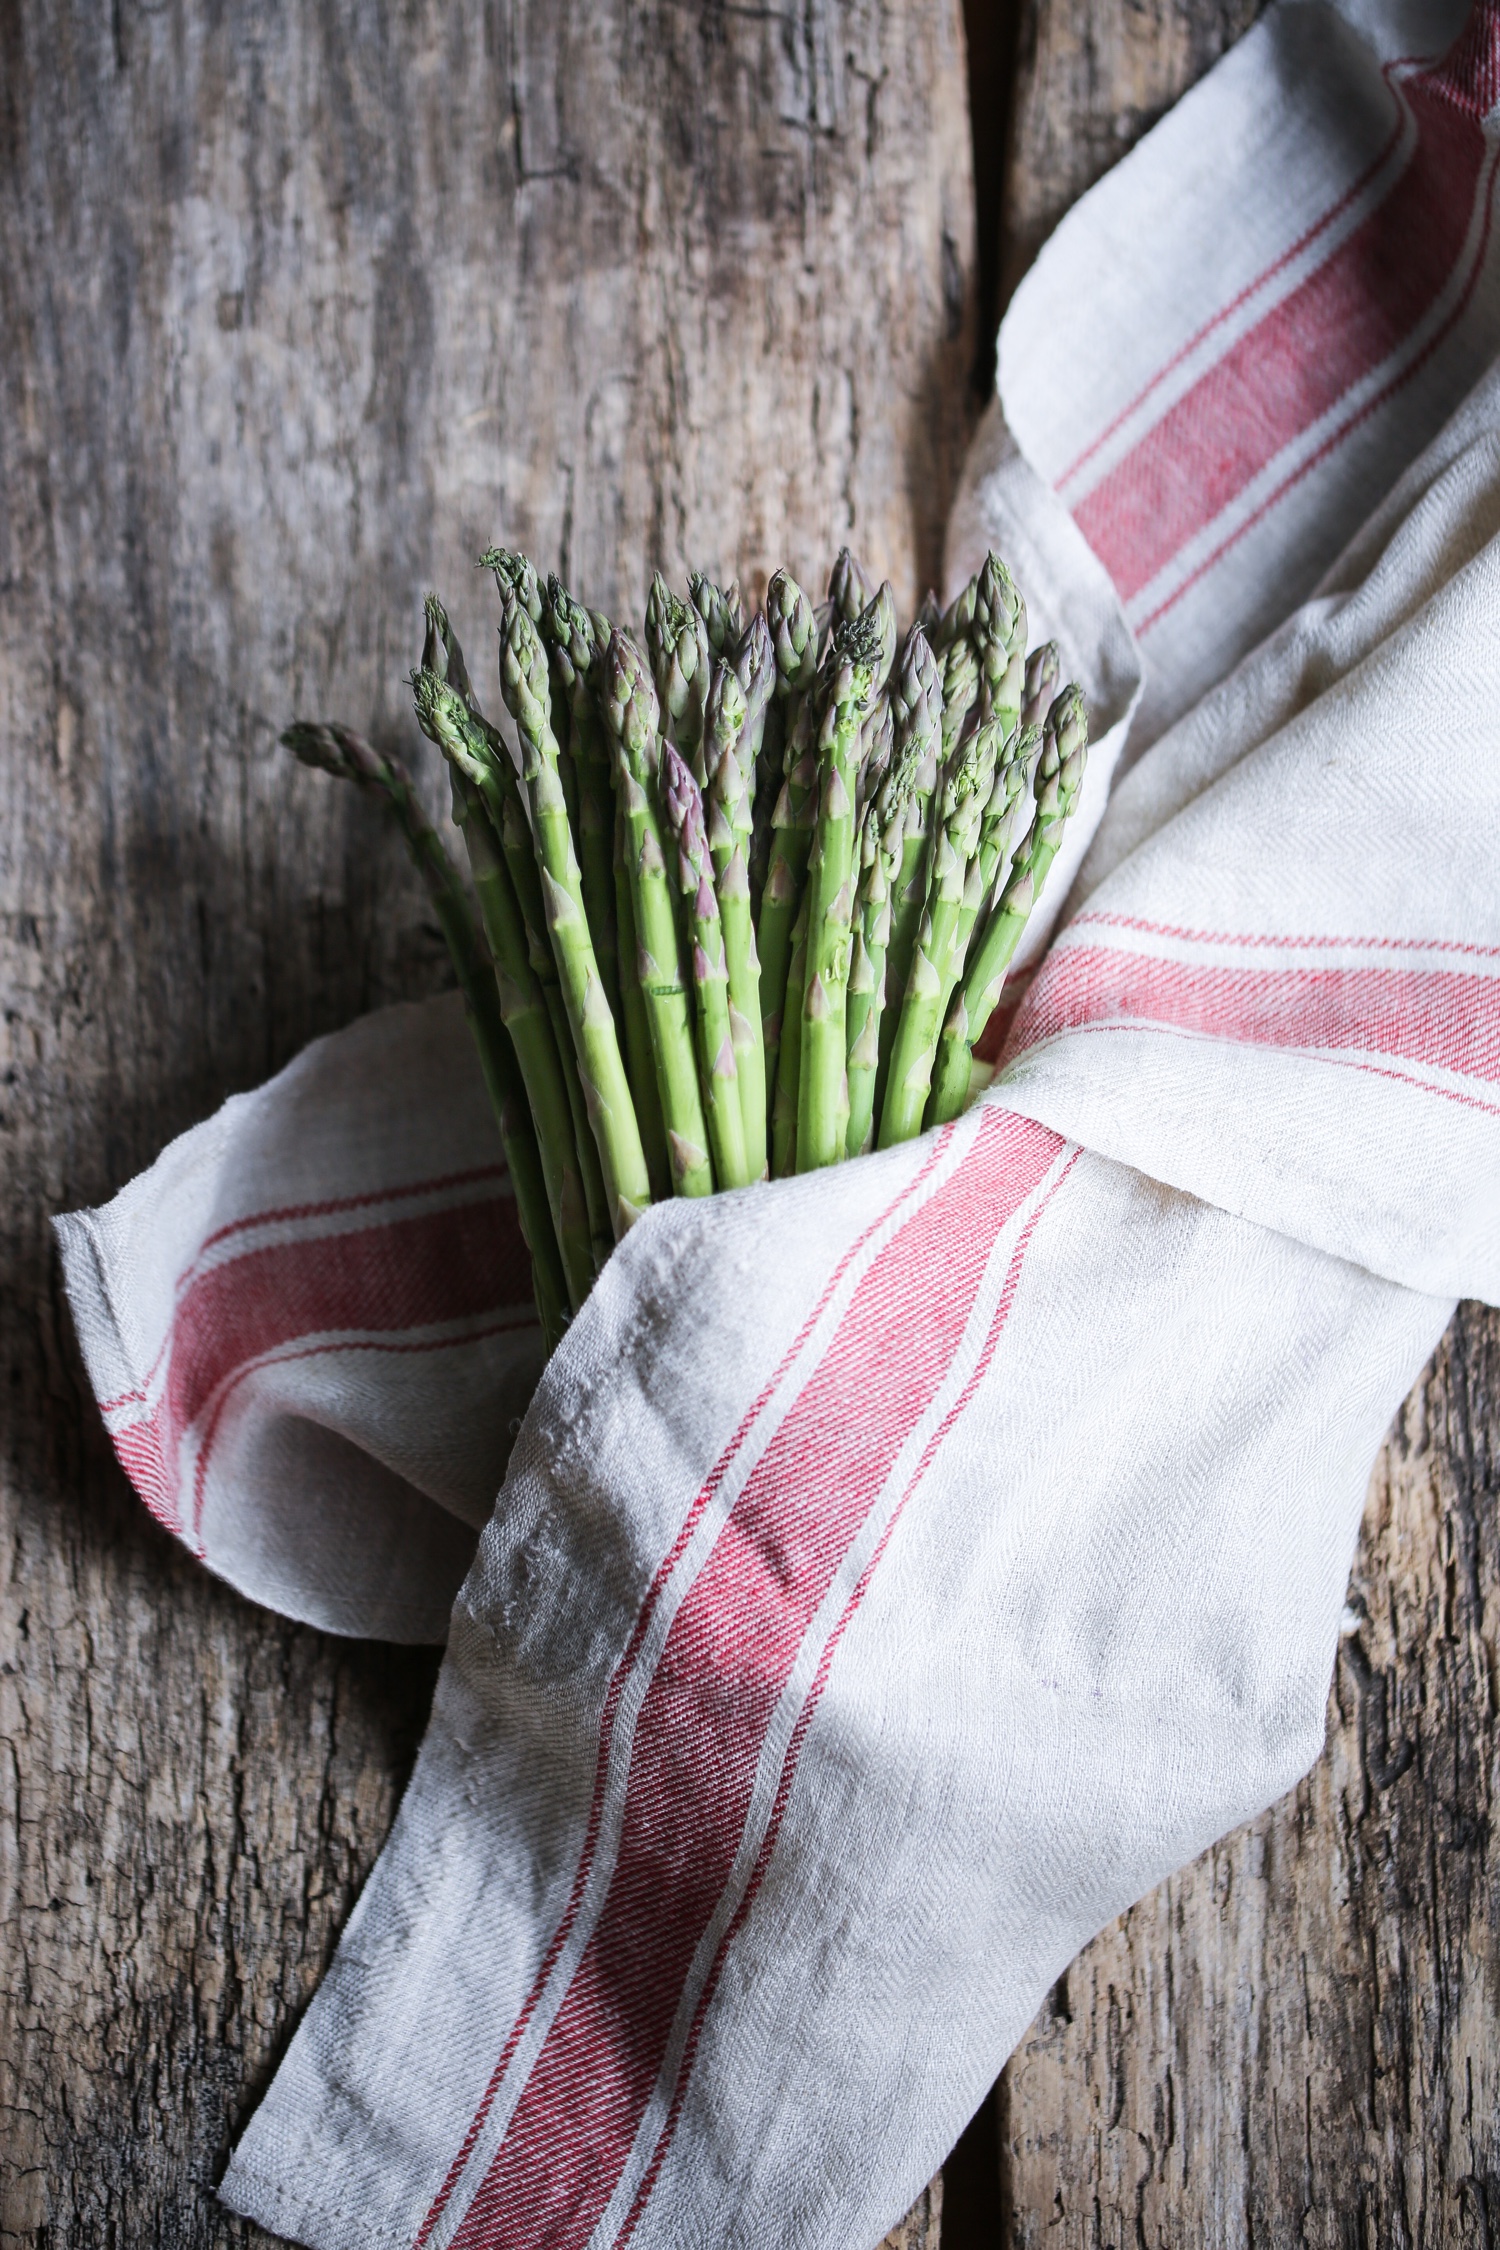 Favorite spring vegetables and how to cook with them | Tons of great vegan meal ideas using delicious fresh spring produce like peas, radishes, leeks, fennel, spring onions, artichokes, asparagus and more!